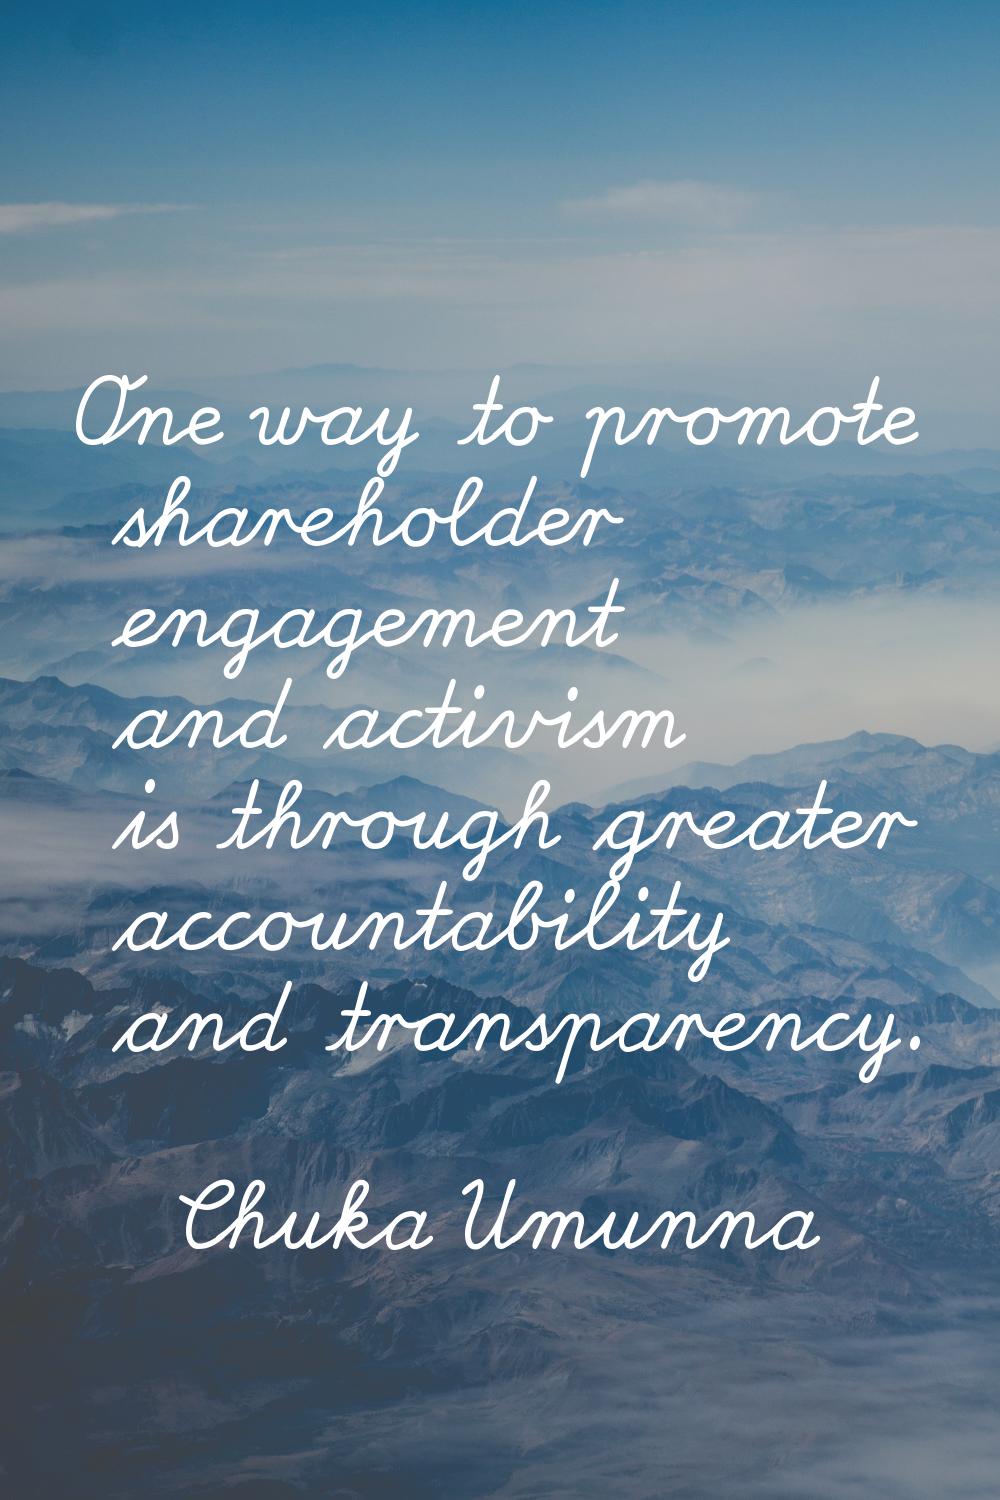 One way to promote shareholder engagement and activism is through greater accountability and transp